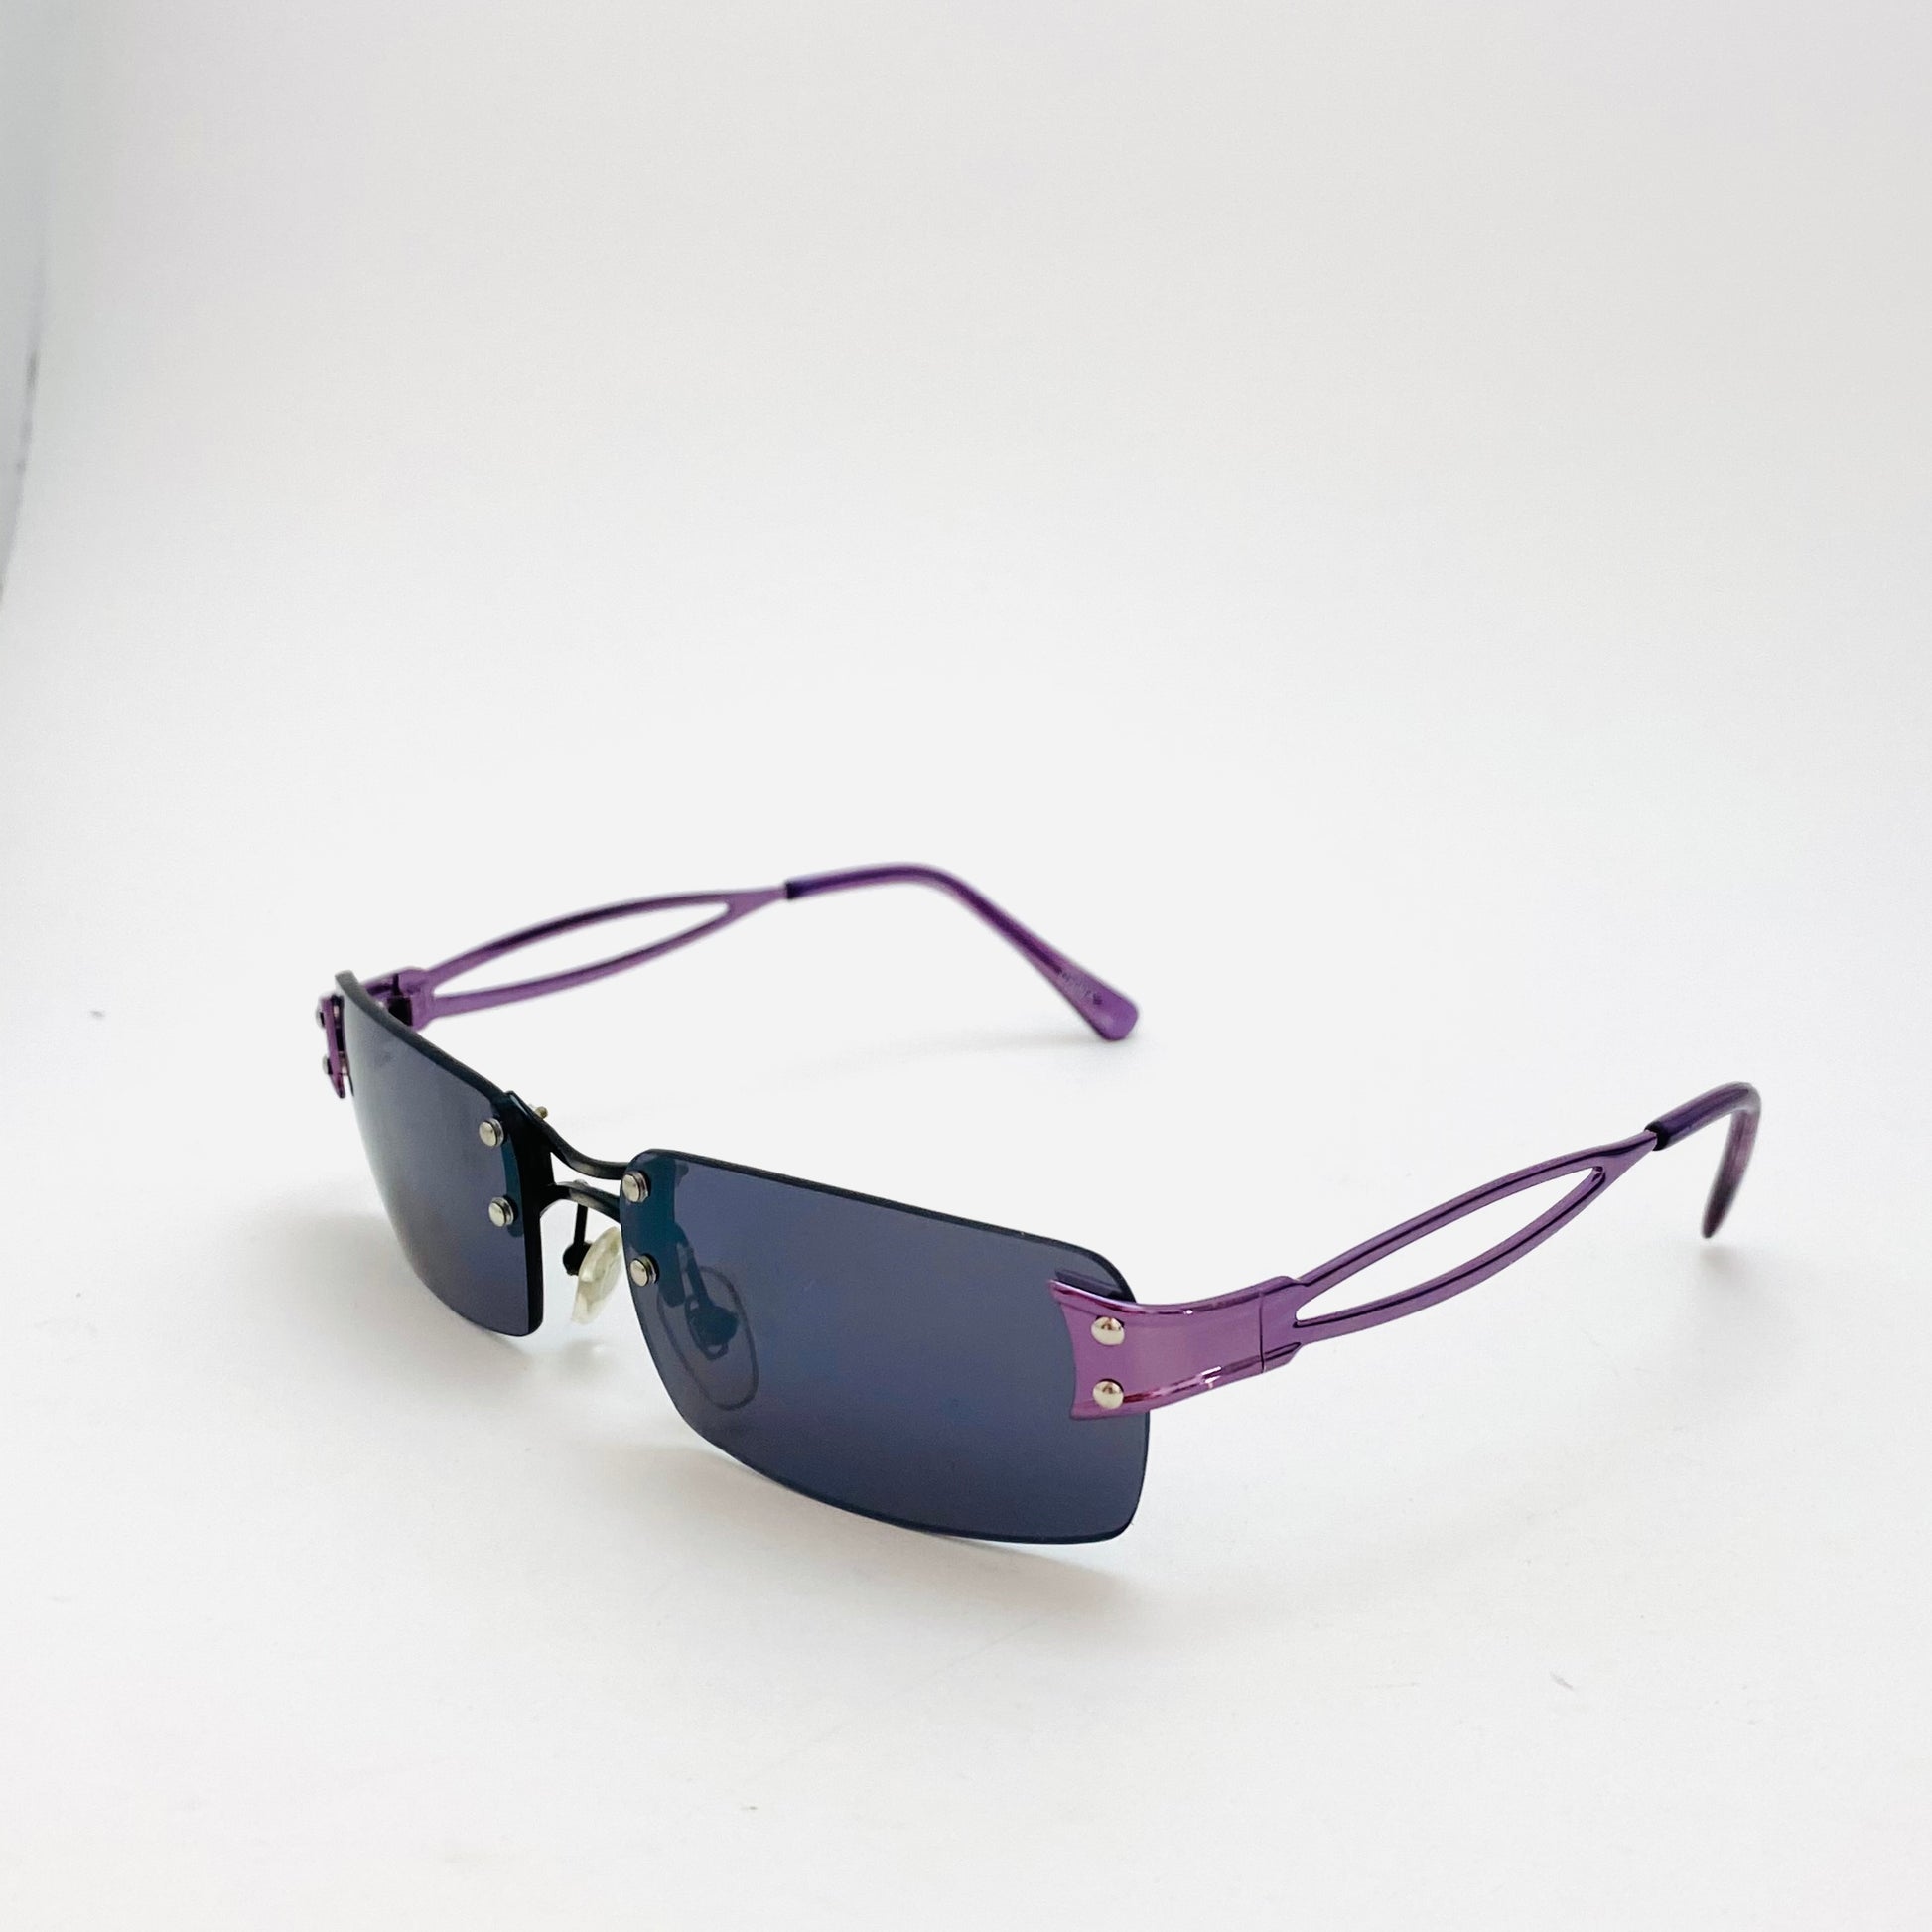 grunge style, dark lens, rimless deadstock sunglasses with purple color
